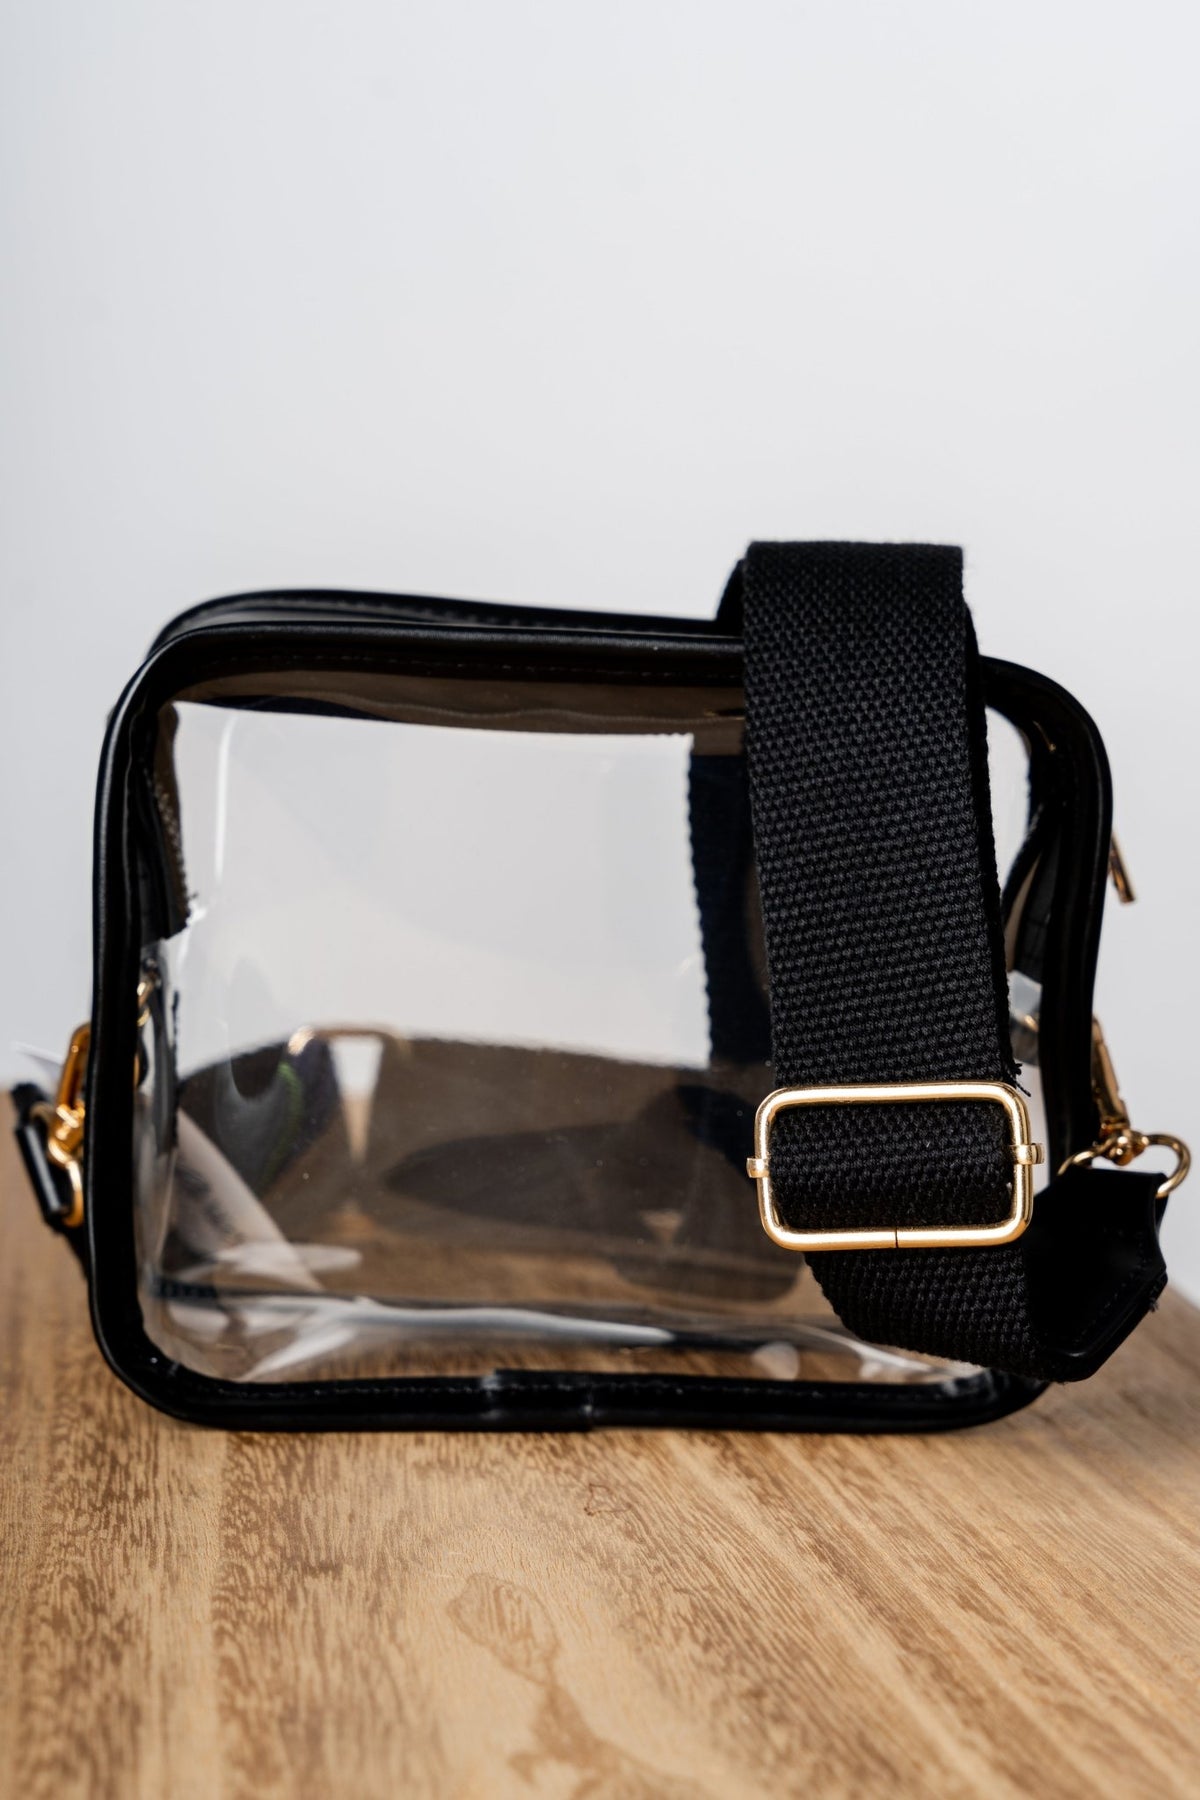 Clear camera crossbody stadium bag black - Trendy Bags at Lush Fashion Lounge Boutique in Oklahoma City